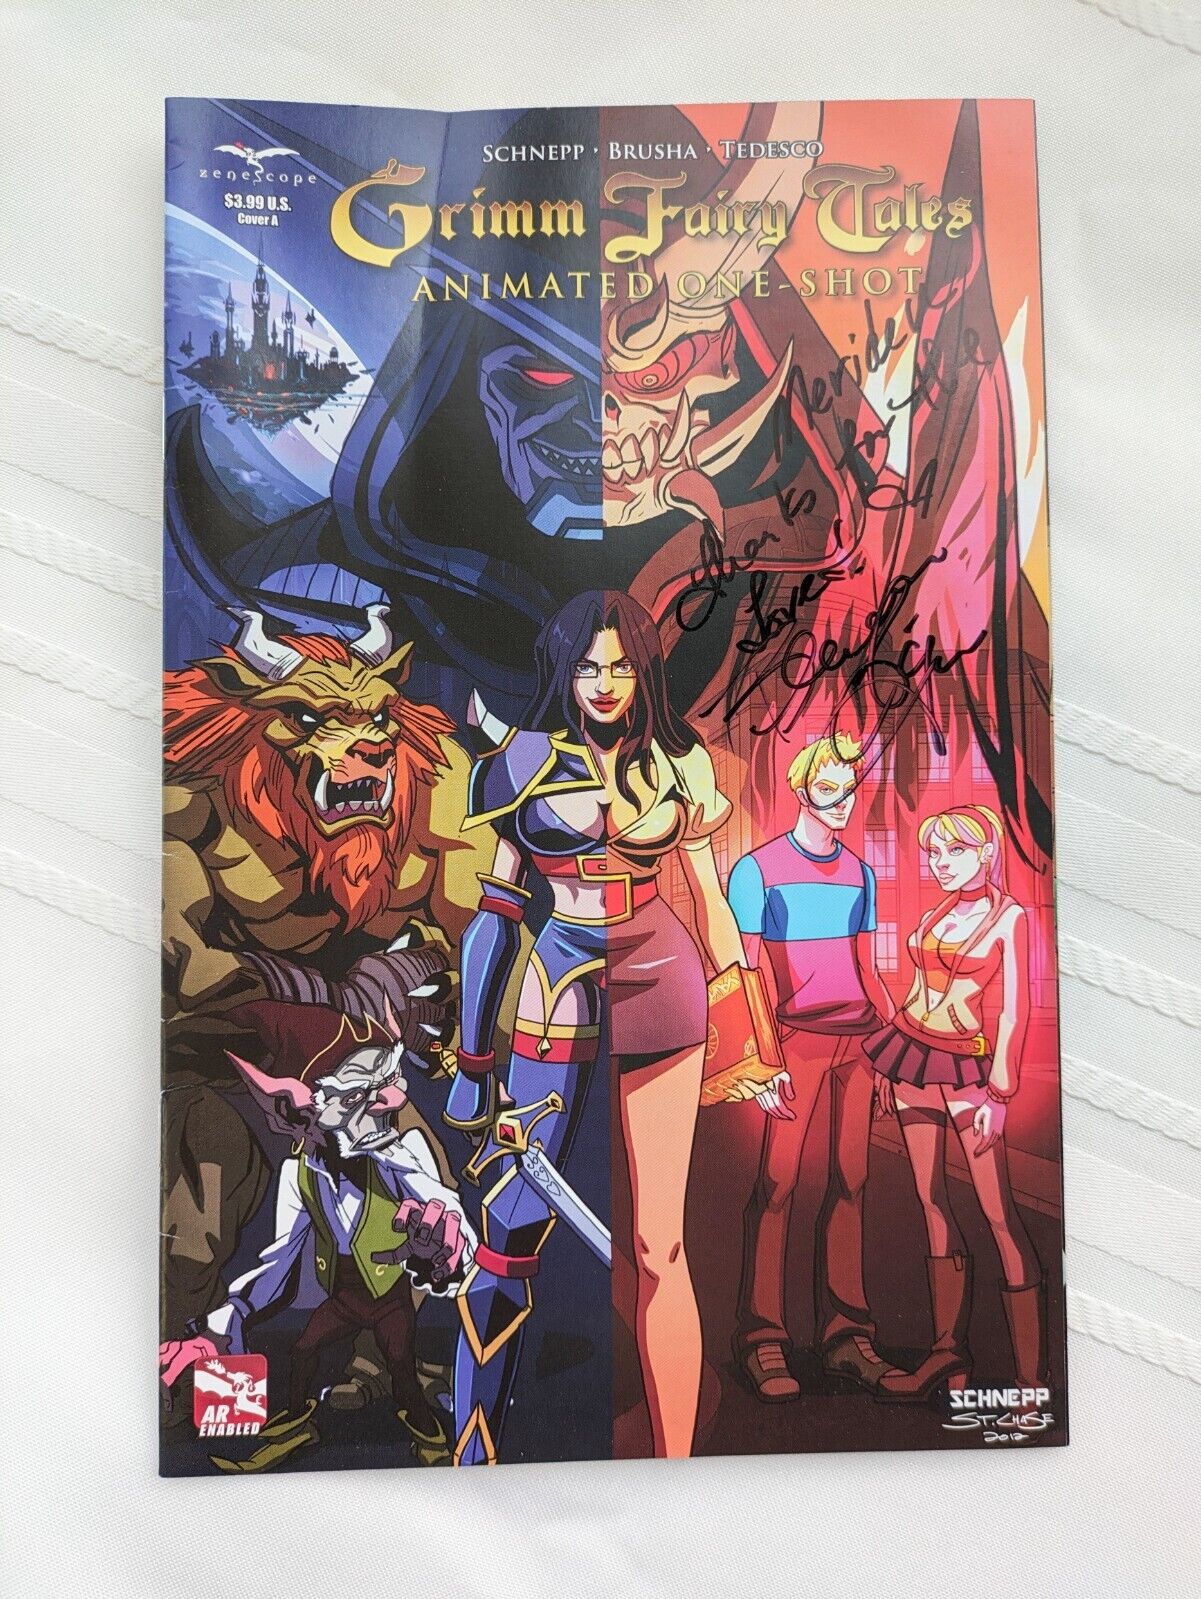 Grimm Fairy Tales Comic Book Oct 2012 1st Print Signed (8oz)